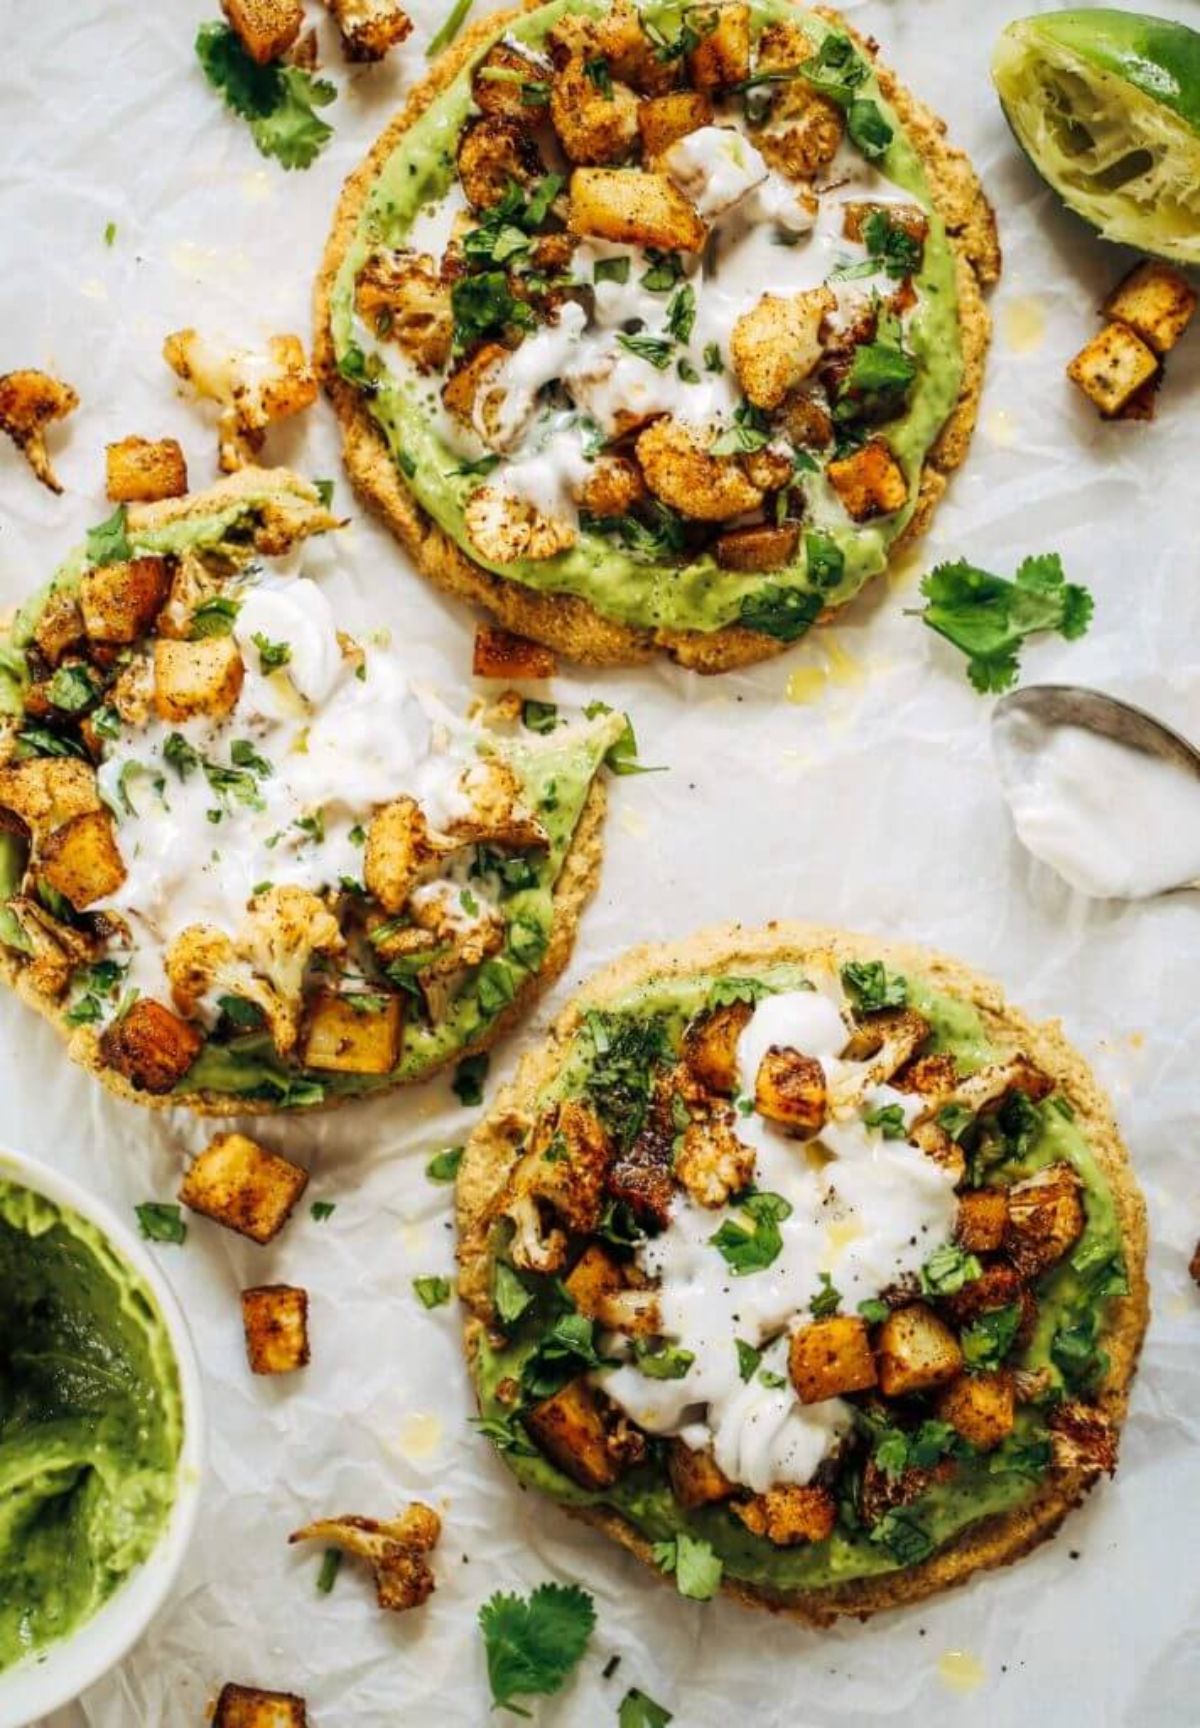 3 cauliflower pittas topped with guacamole, herbs, and roasted cauliflower cubes